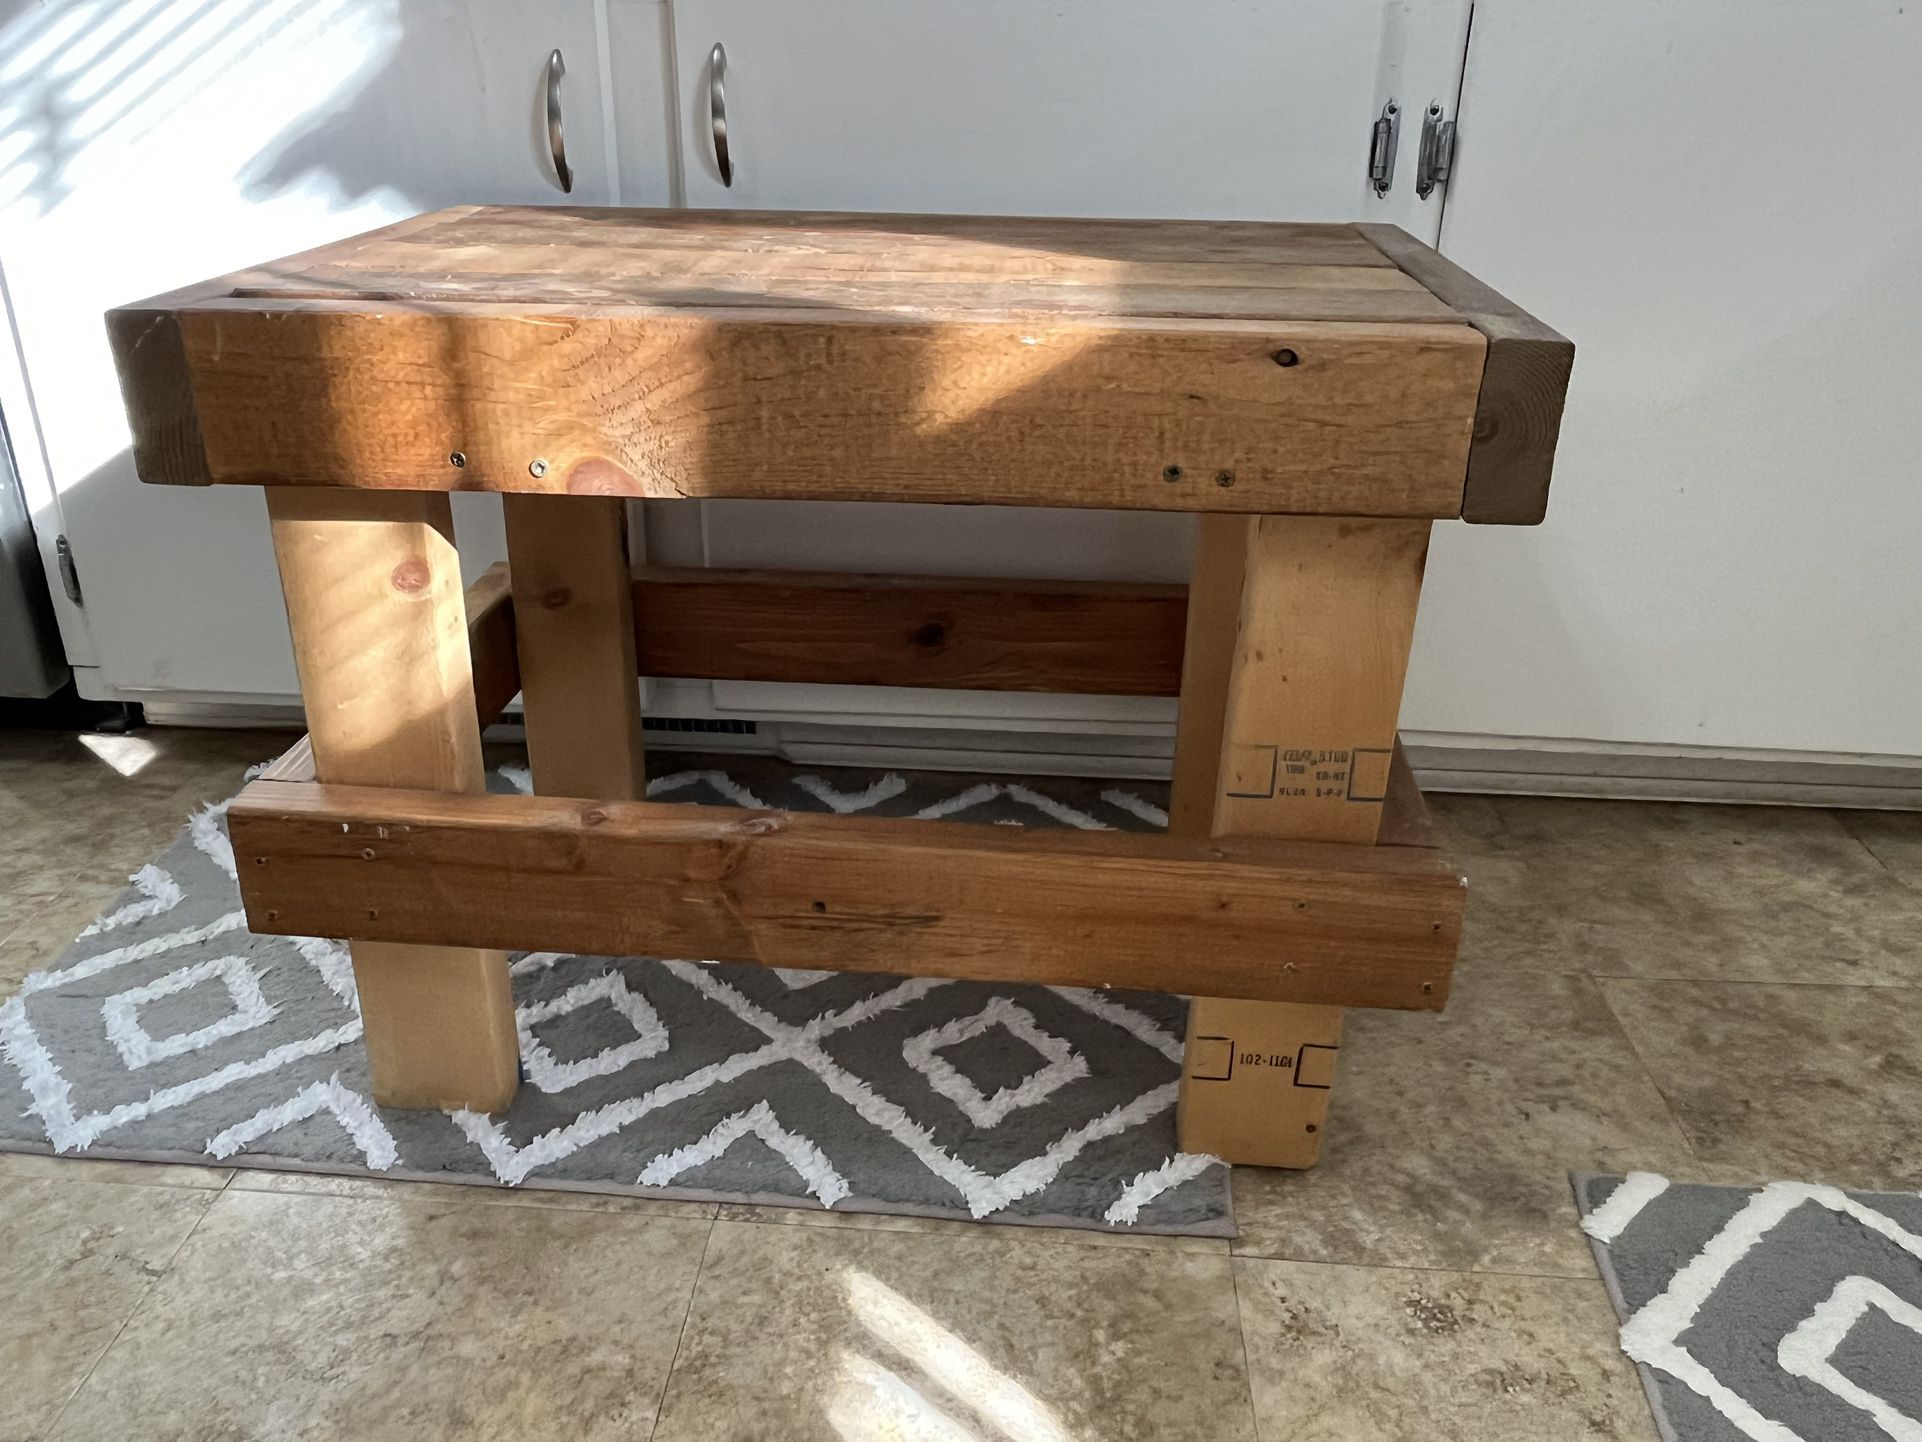 2 Rustic Wood Side tables / Bench seating